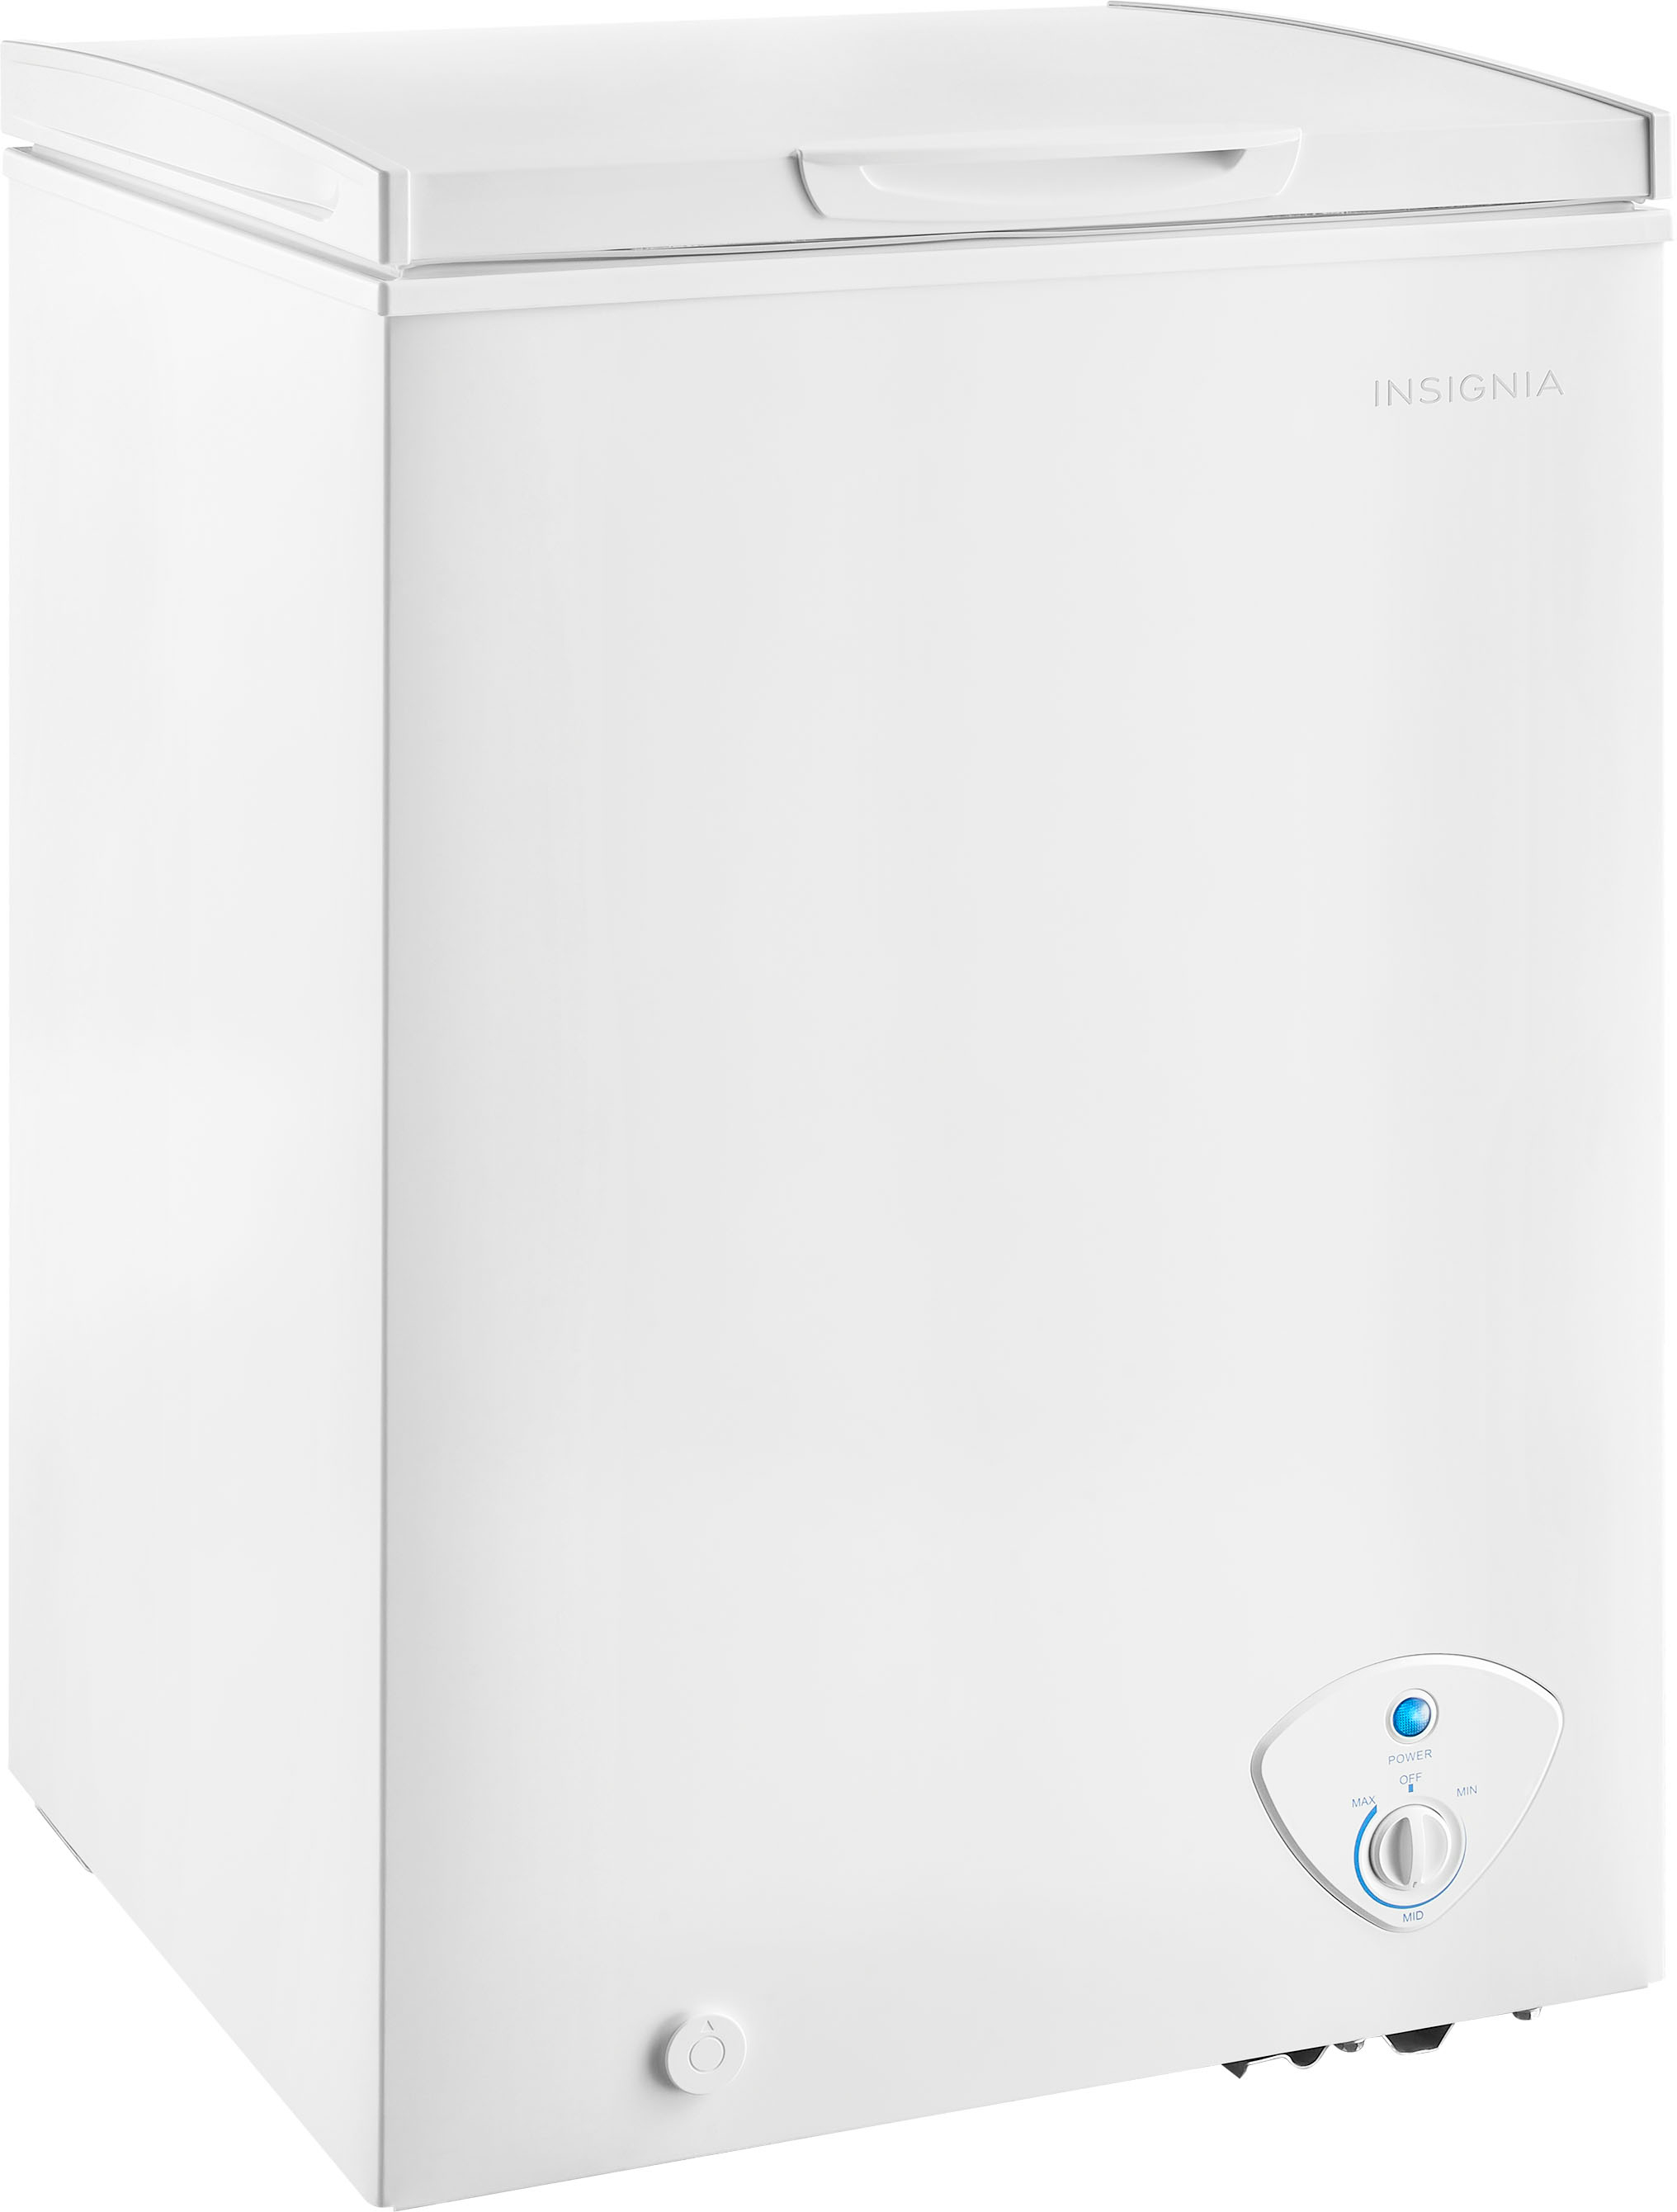 Angle View: Whirlpool - 21.7 Cu. Ft. Chest Freezer - White